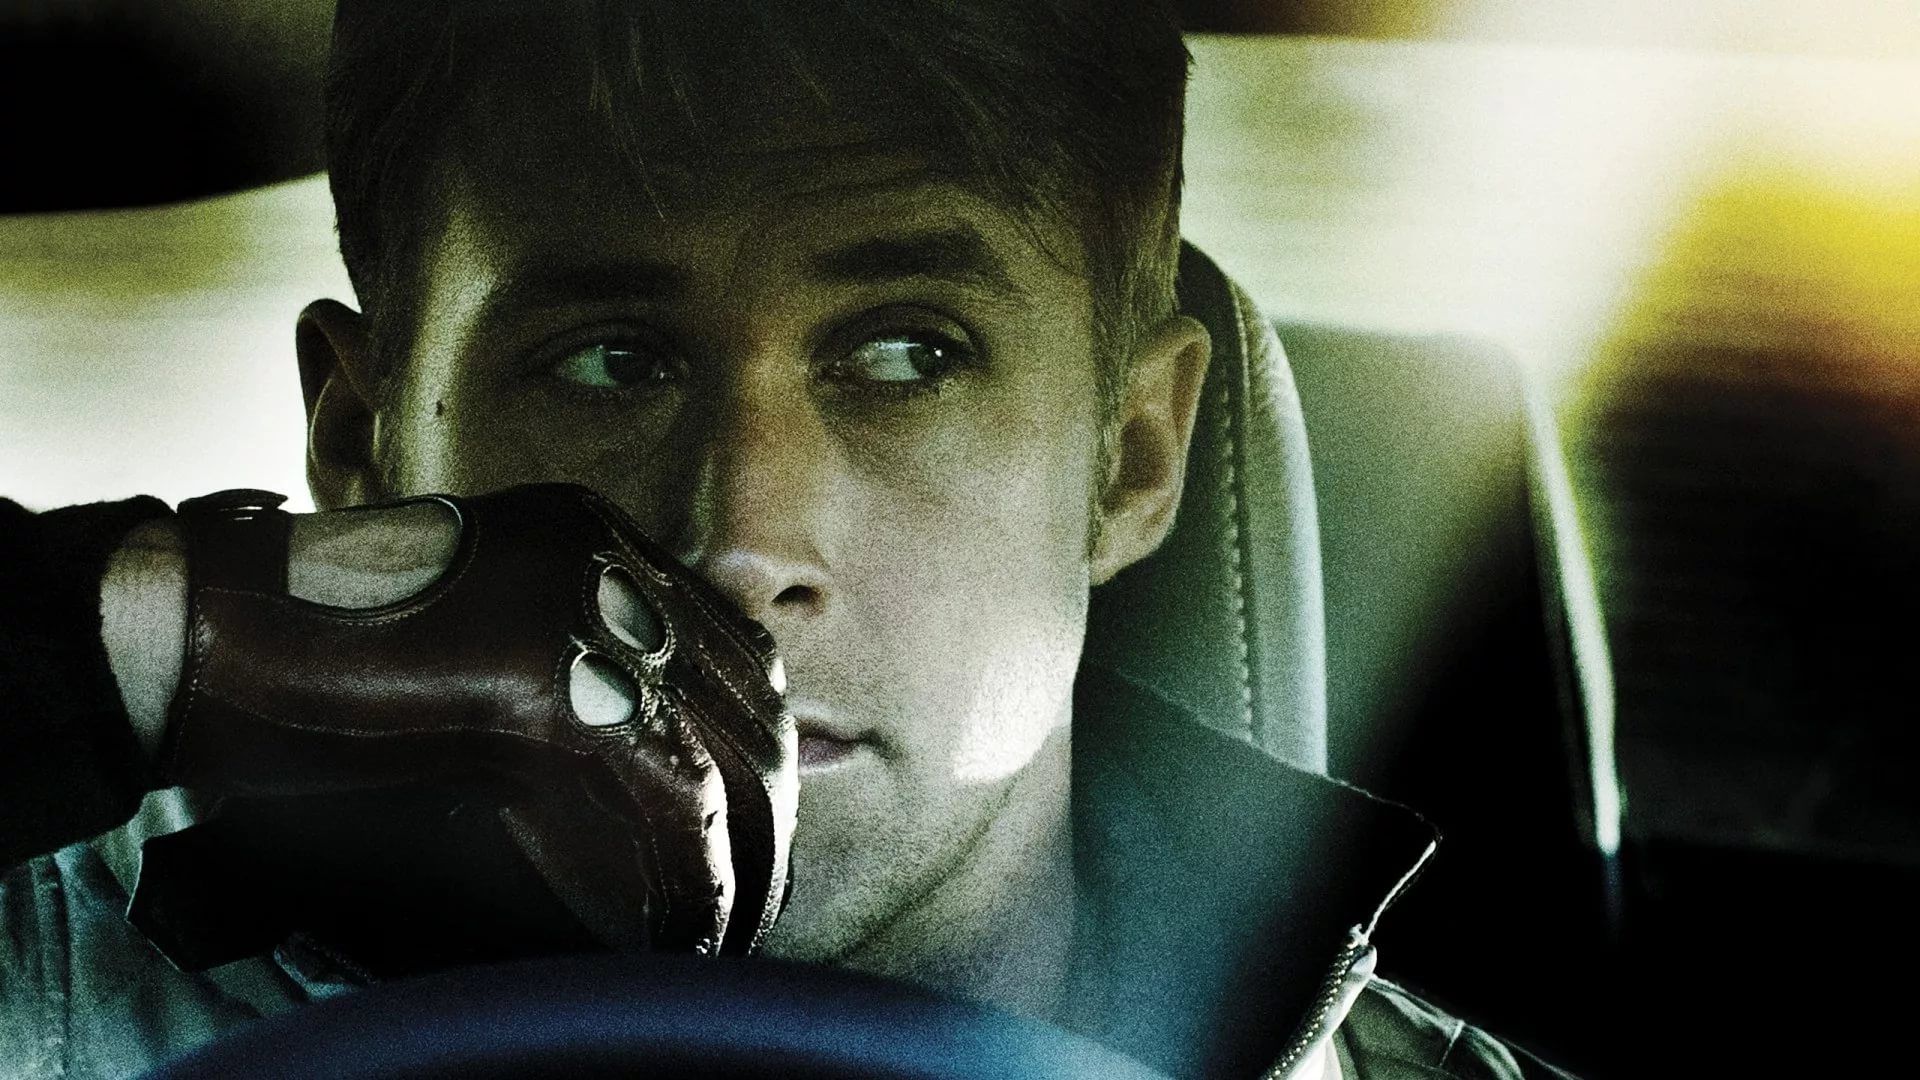 Wallpaper  black portrait photography movies Ryan Gosling Drive  head color film darkness 1920x1080  Aliced1  247750  HD Wallpapers   WallHere